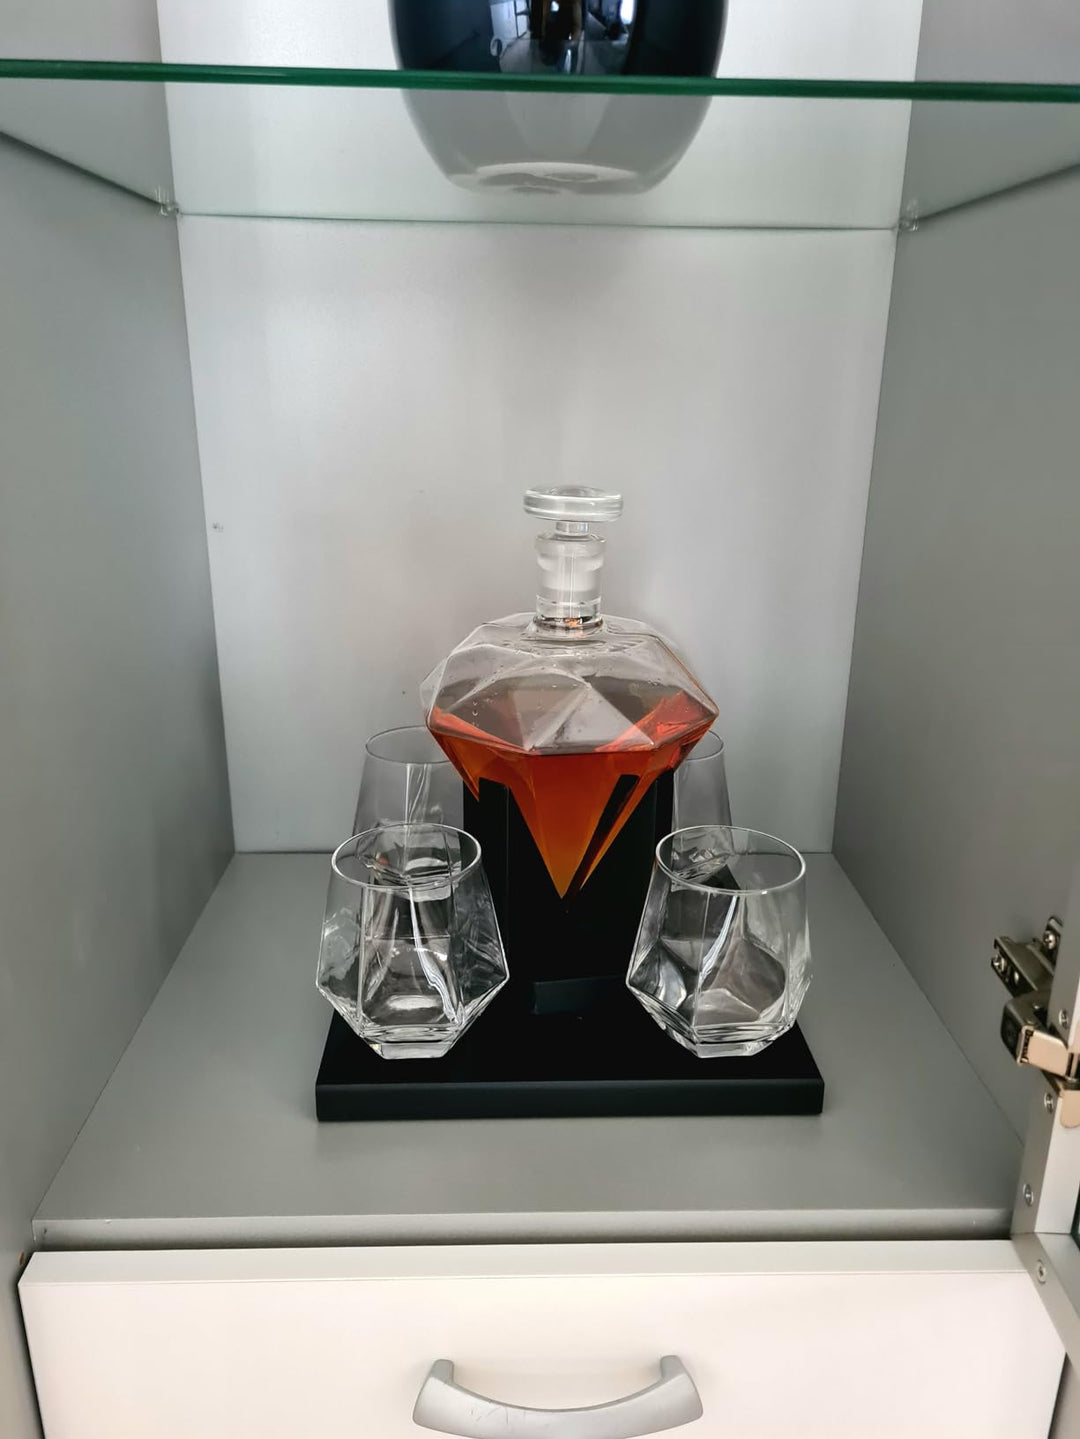 jewel_decanter_on_shelf_4_glasses_and_whiskey